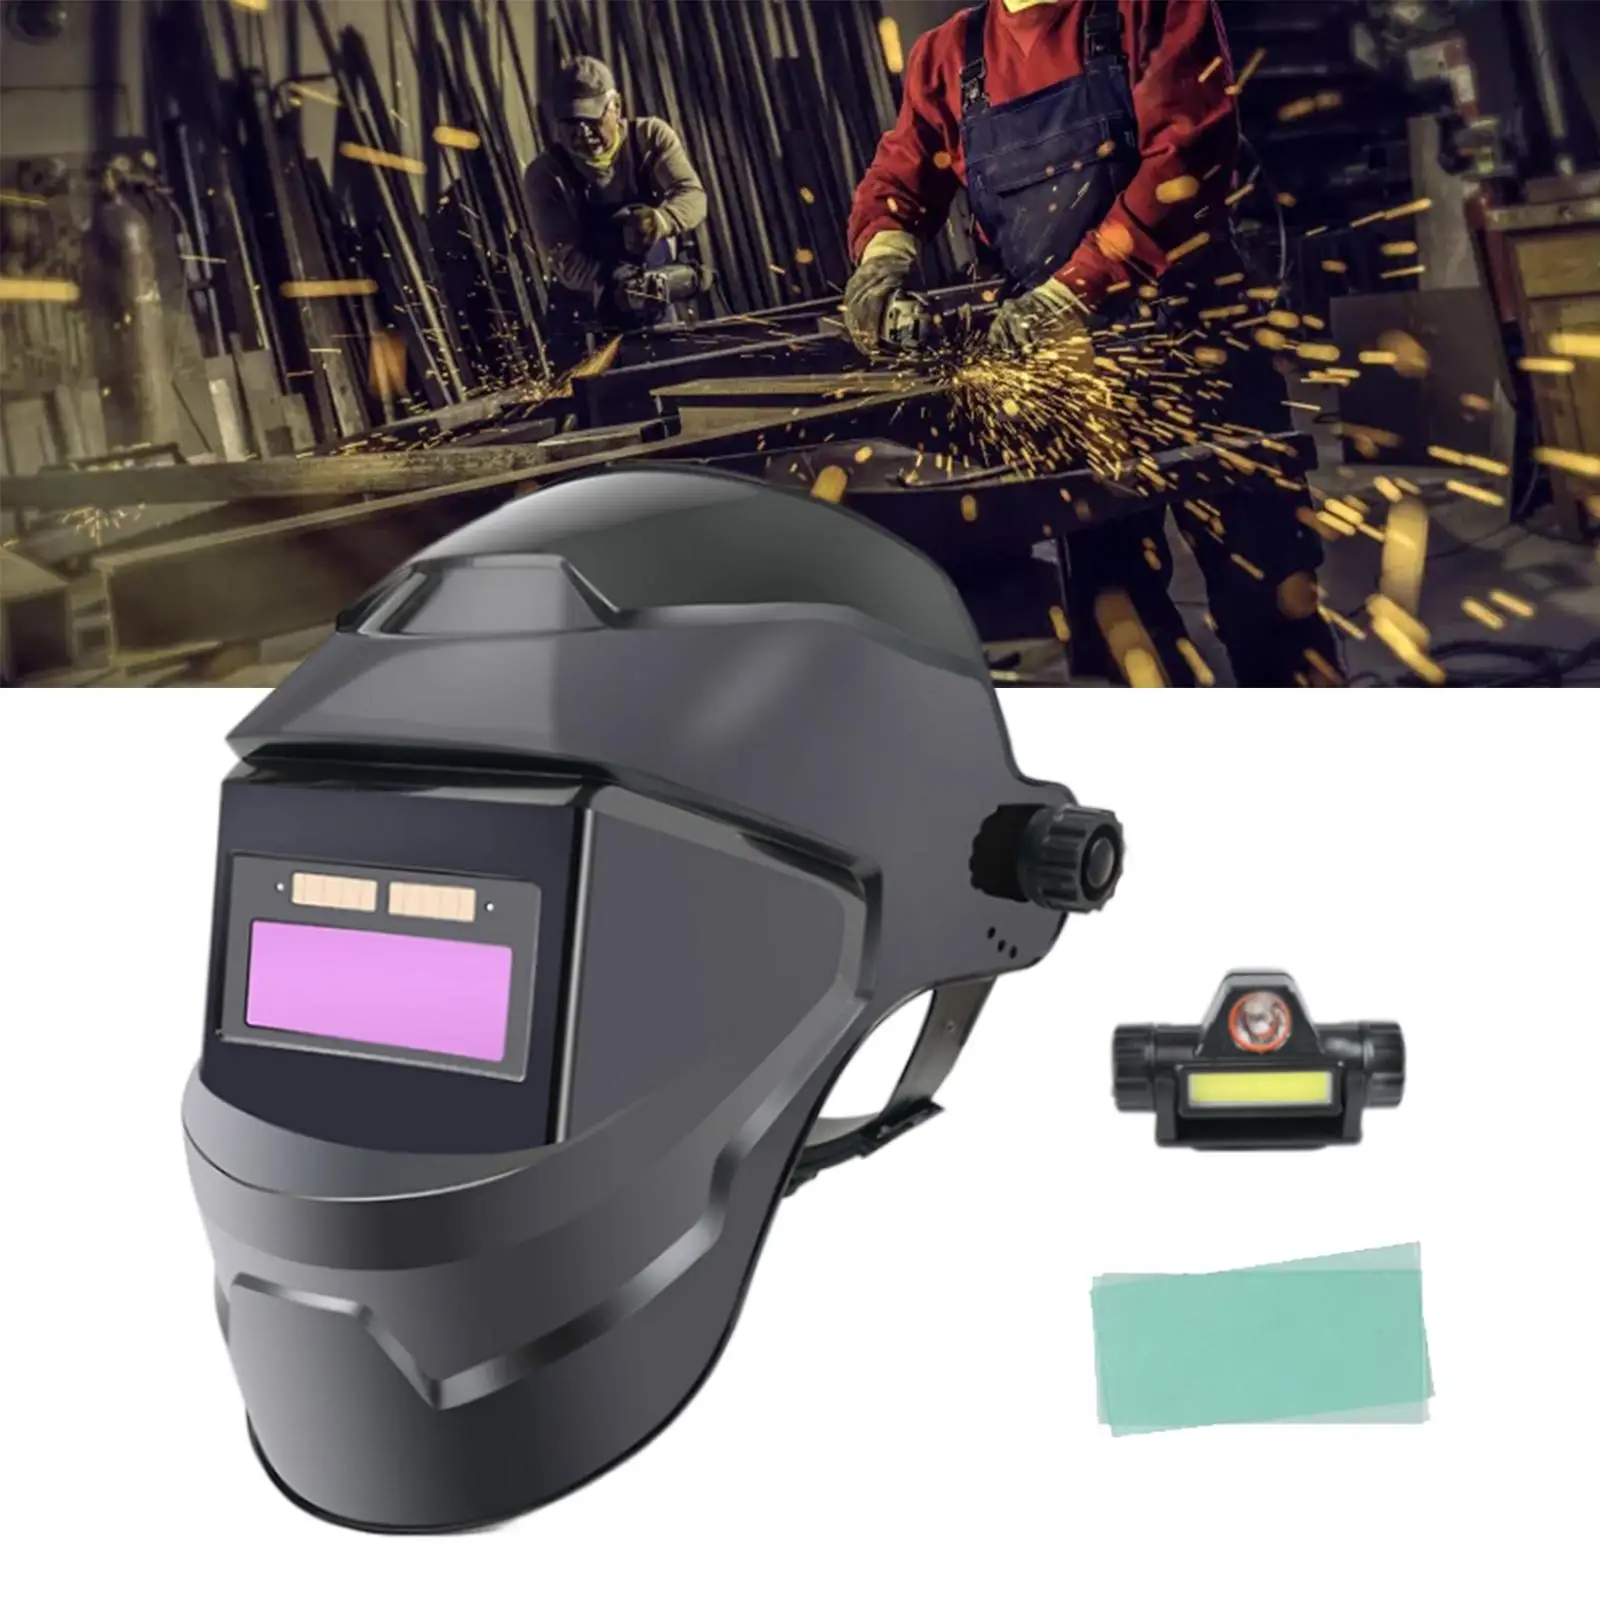 Solar Powered Welding Helmet Eyes and Face Protection Large Viewing Large Field of View Welding Face Cover Protective Gear